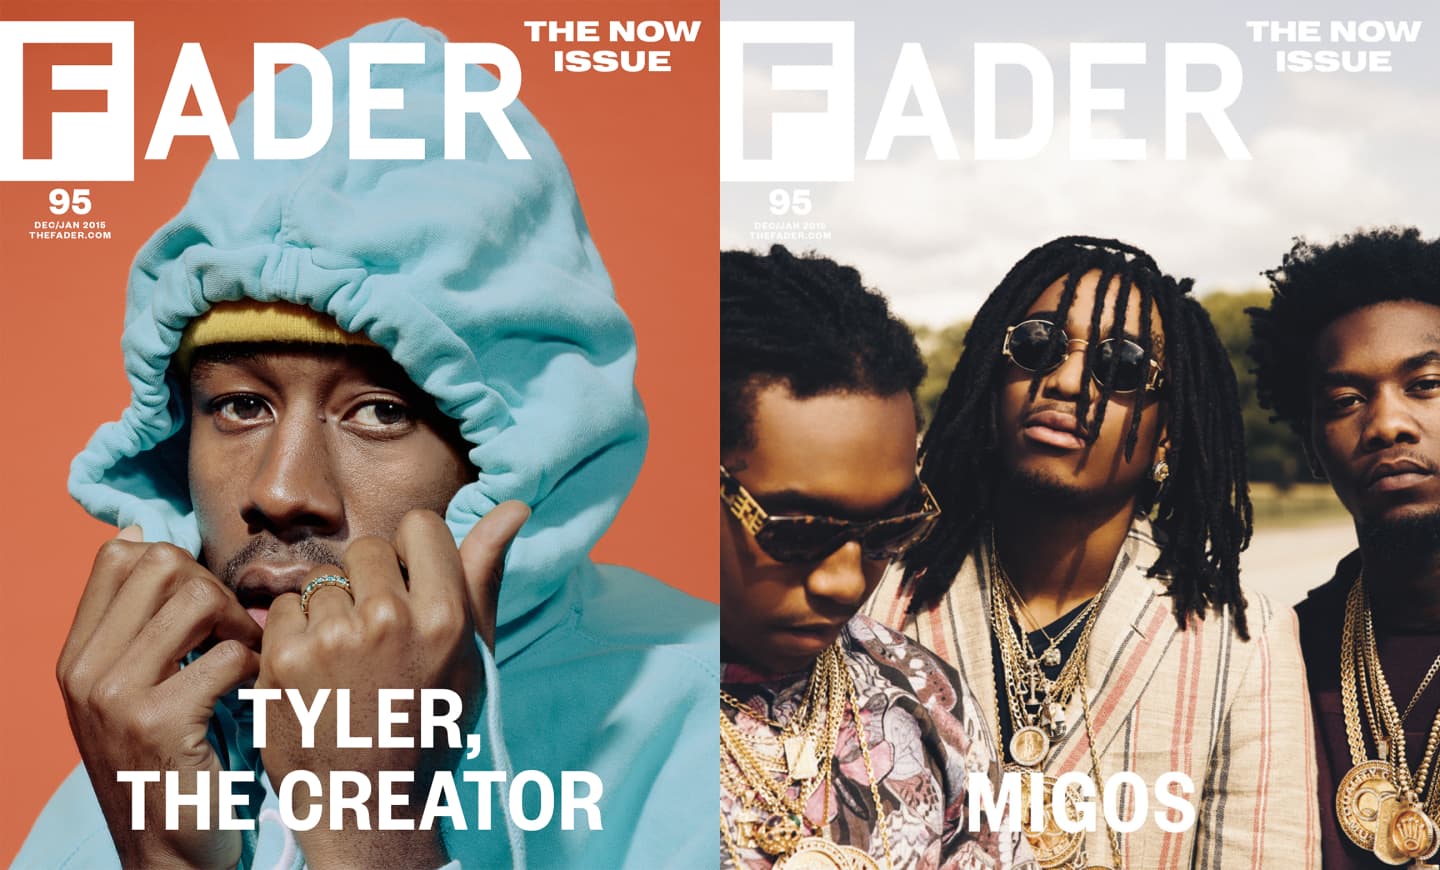 The FADER 95